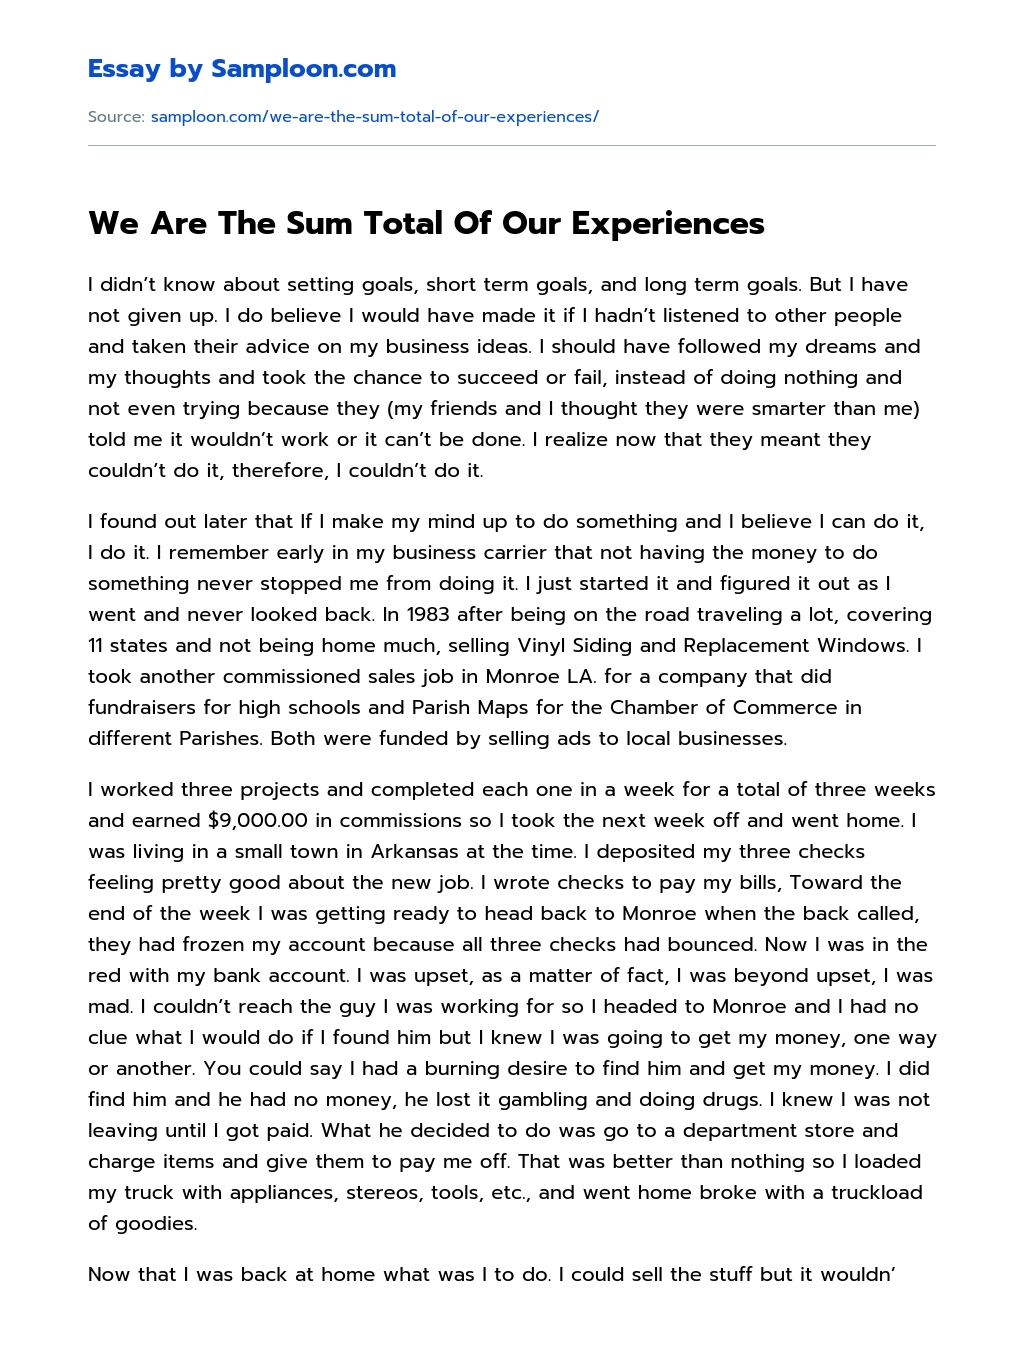 We Are The Sum Total Of Our Experiences essay